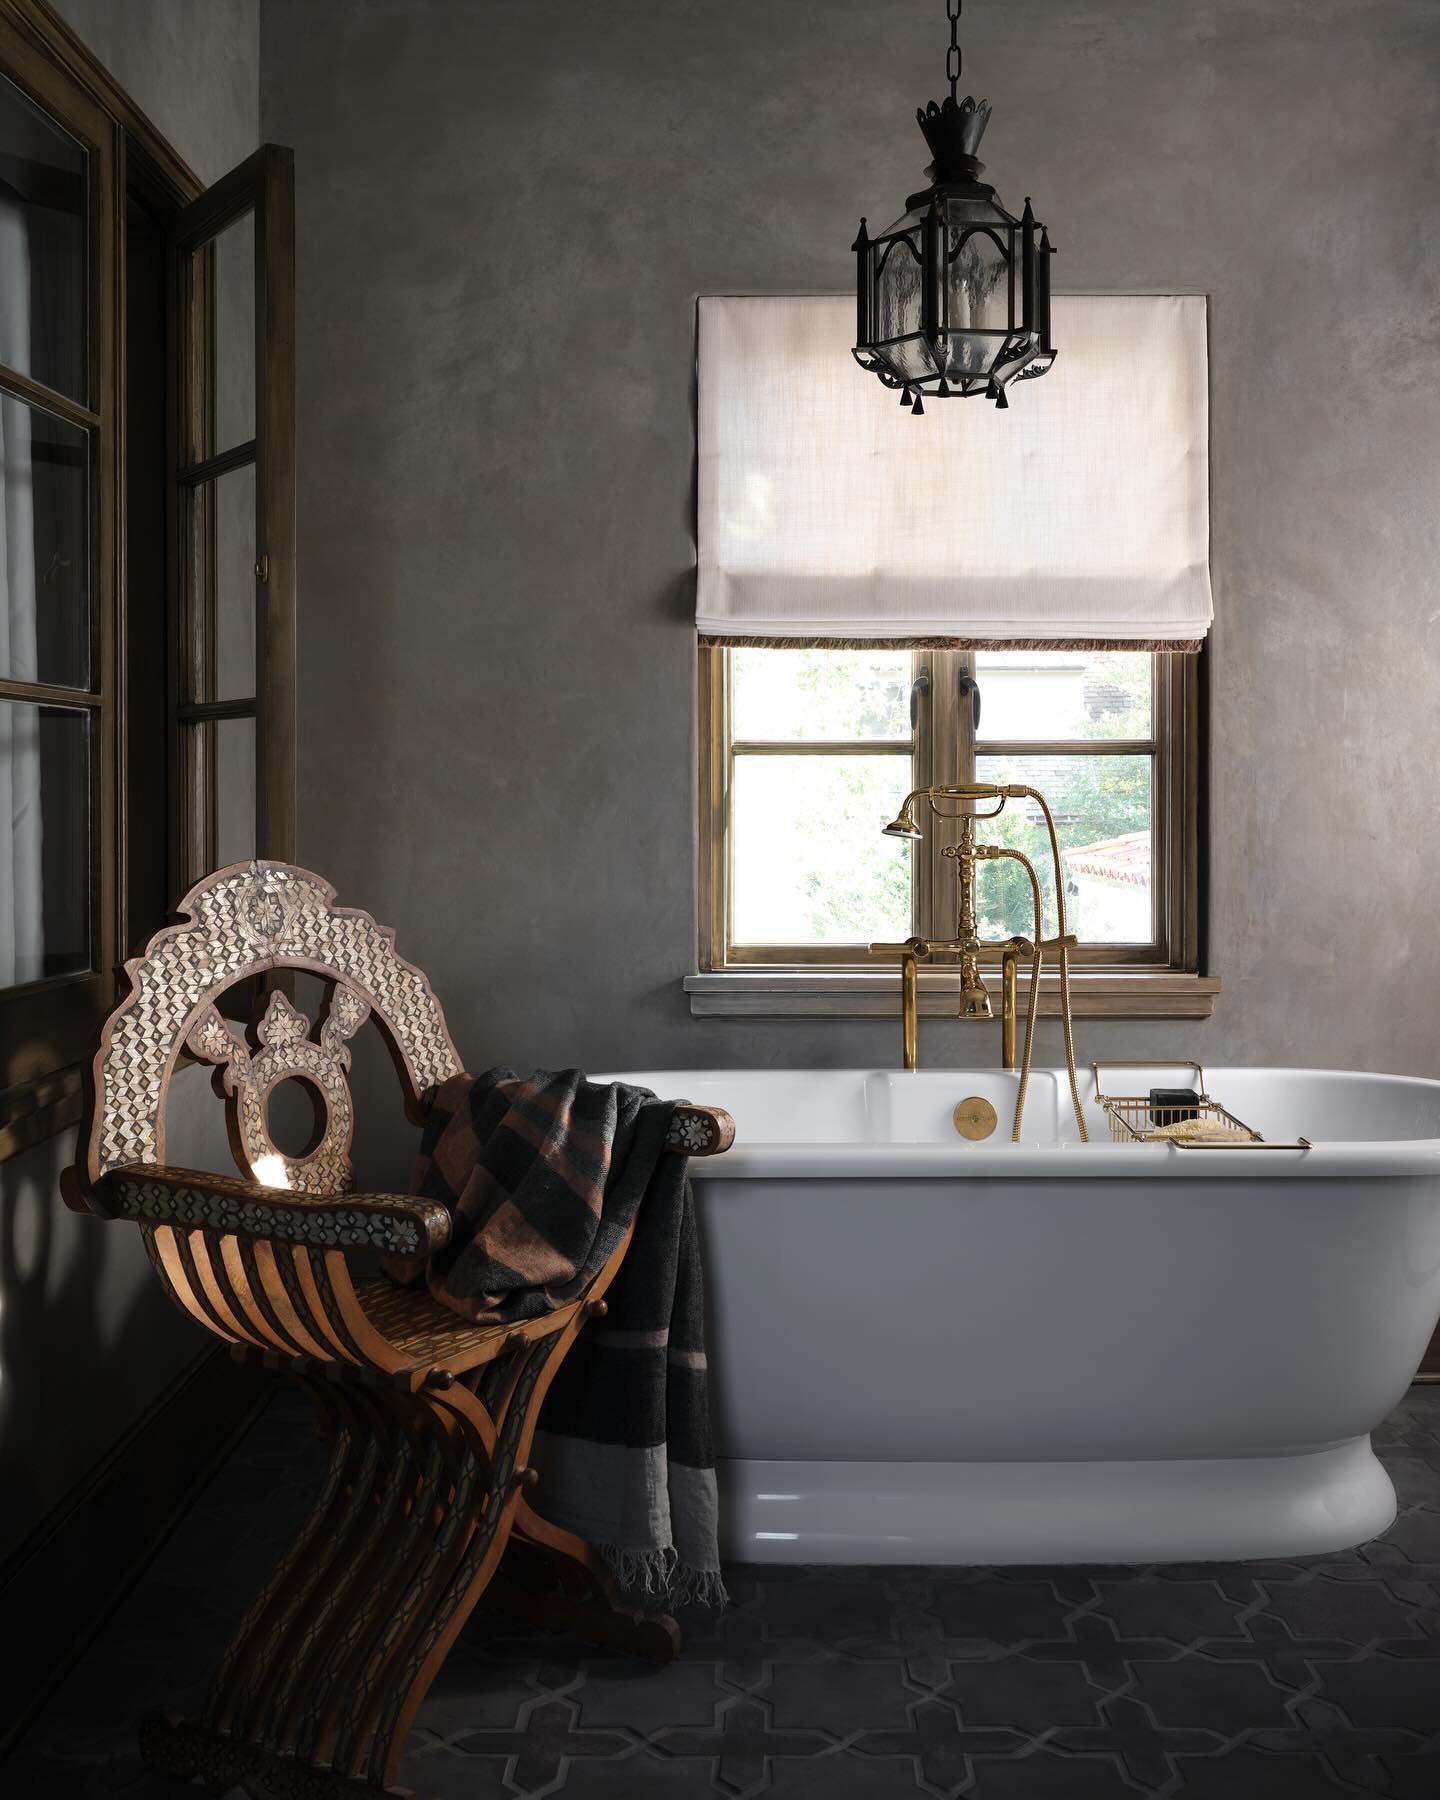 Moody moment in the Guest bath at our Old Enfield project 
.
.
Photography: @lindsay_brown 
Styling: @adamfortner 
#chuinteriors #interiordesign #austininteriordesigner #bathroom